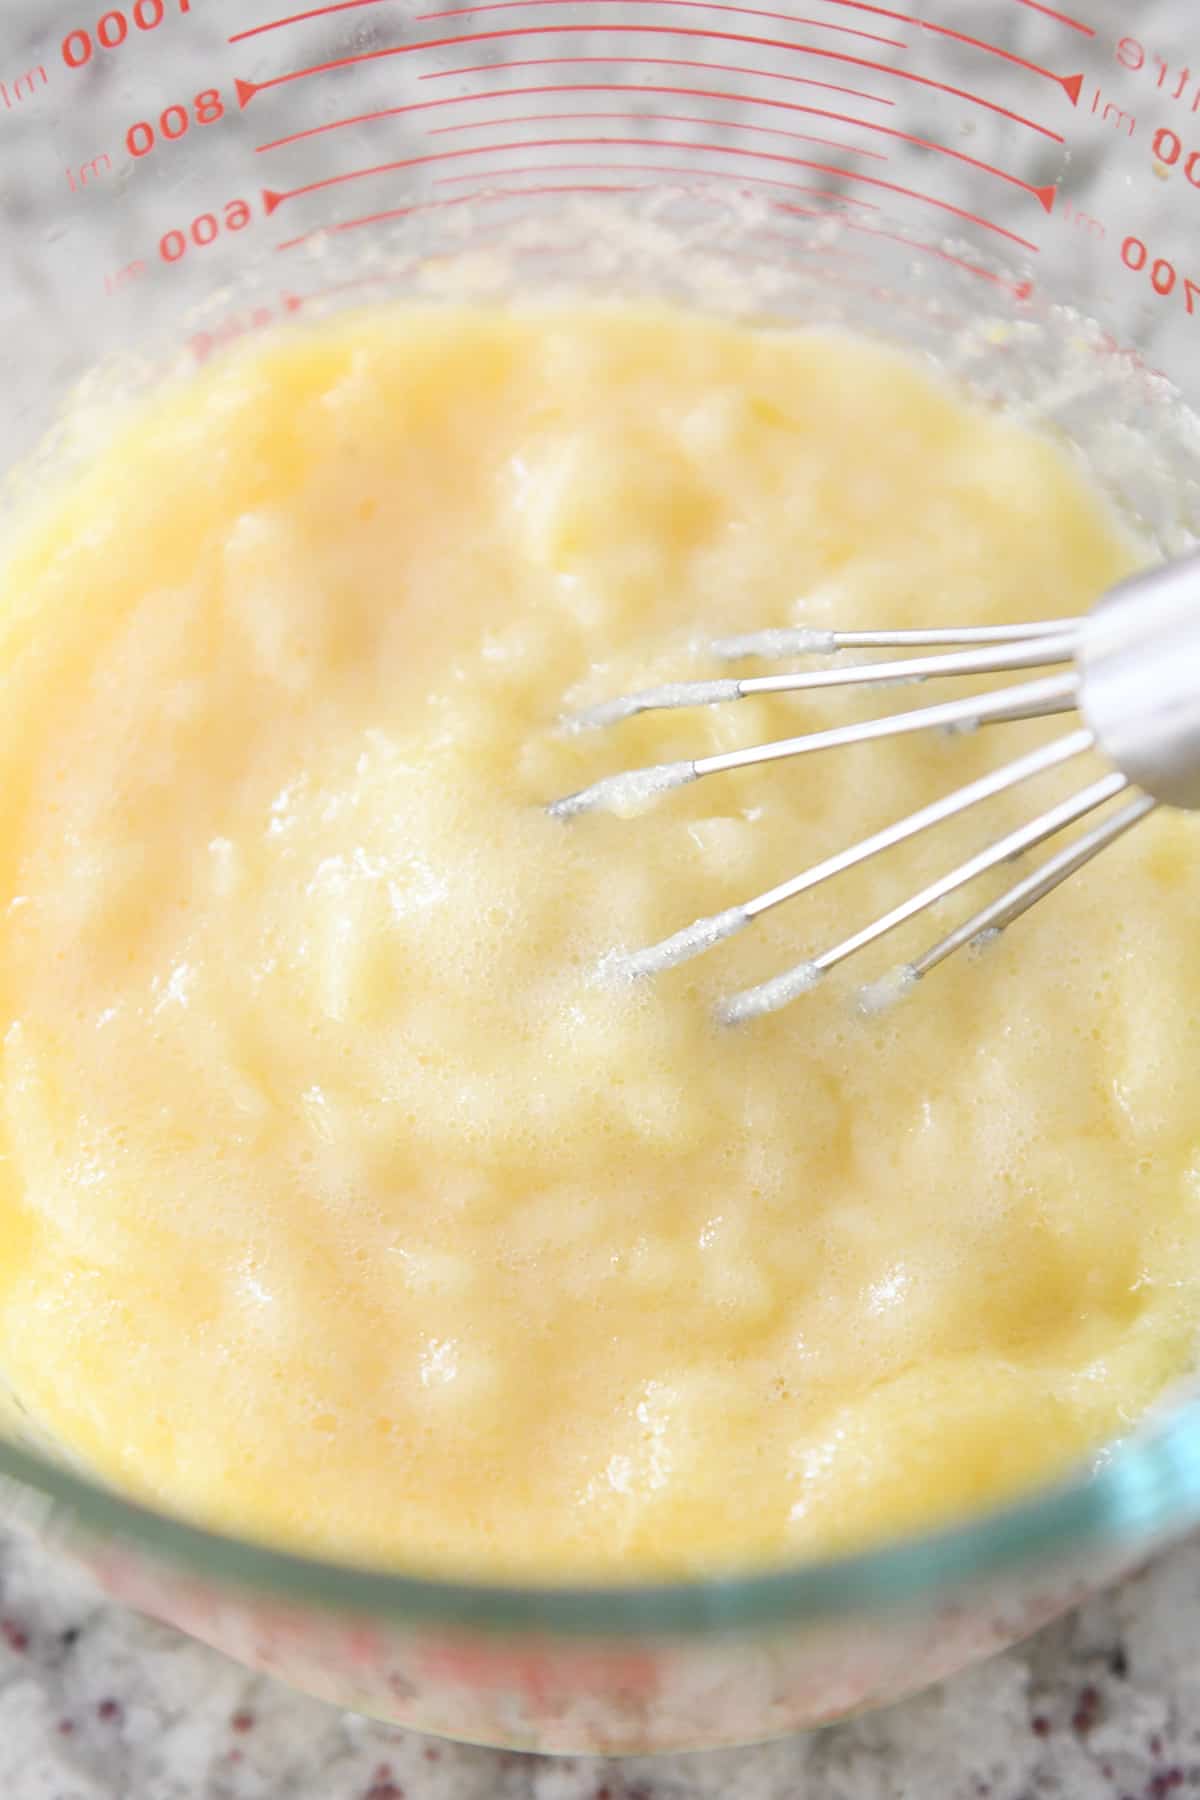 Whisk the lemon curd in a glass bowl